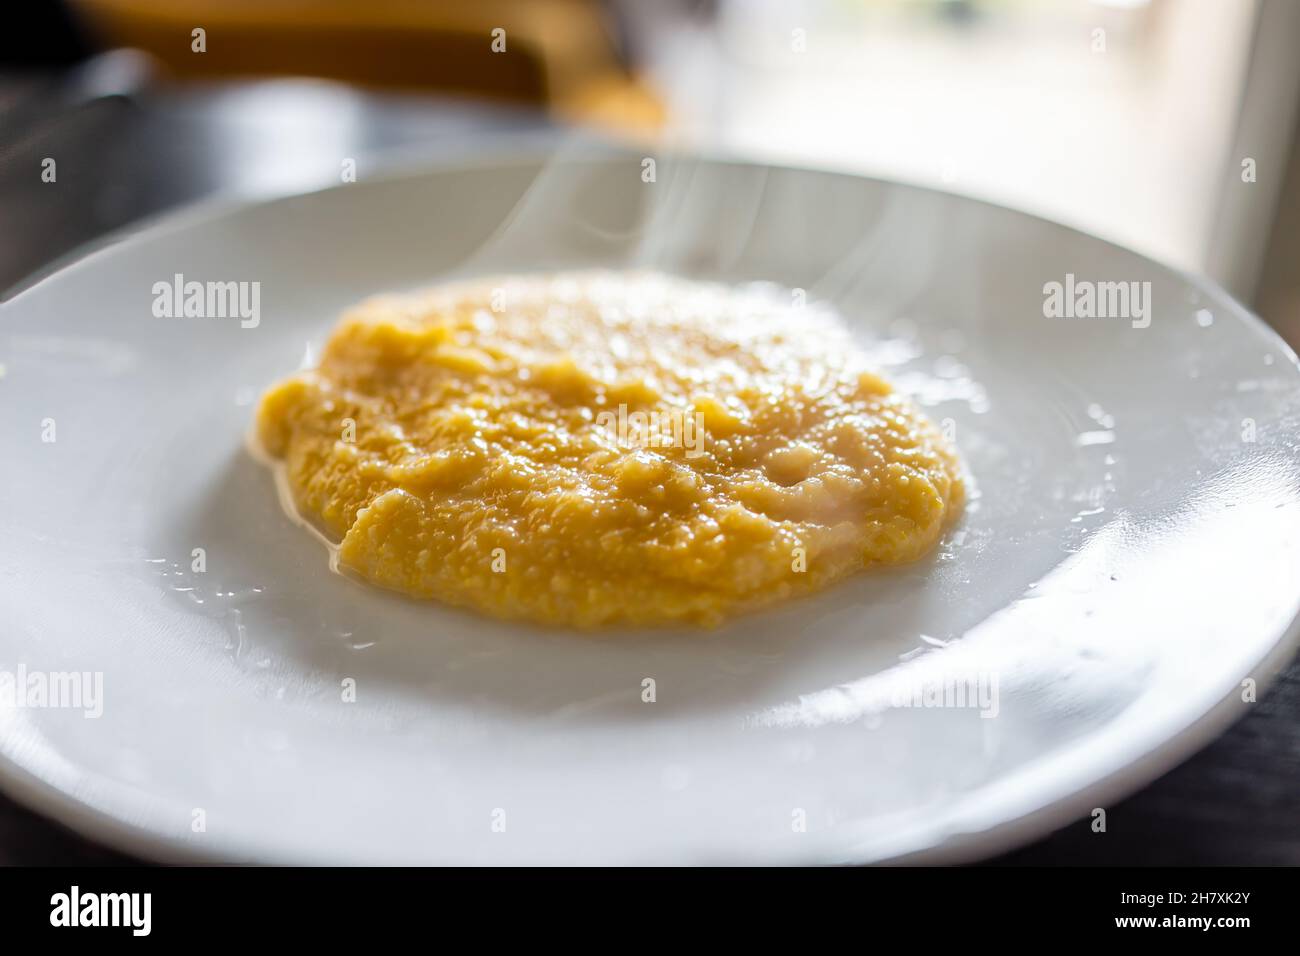 Cooked yellow southern american corn grits on plate as breakfast porridge with hot steam rising and texture of healthy cereal Stock Photo